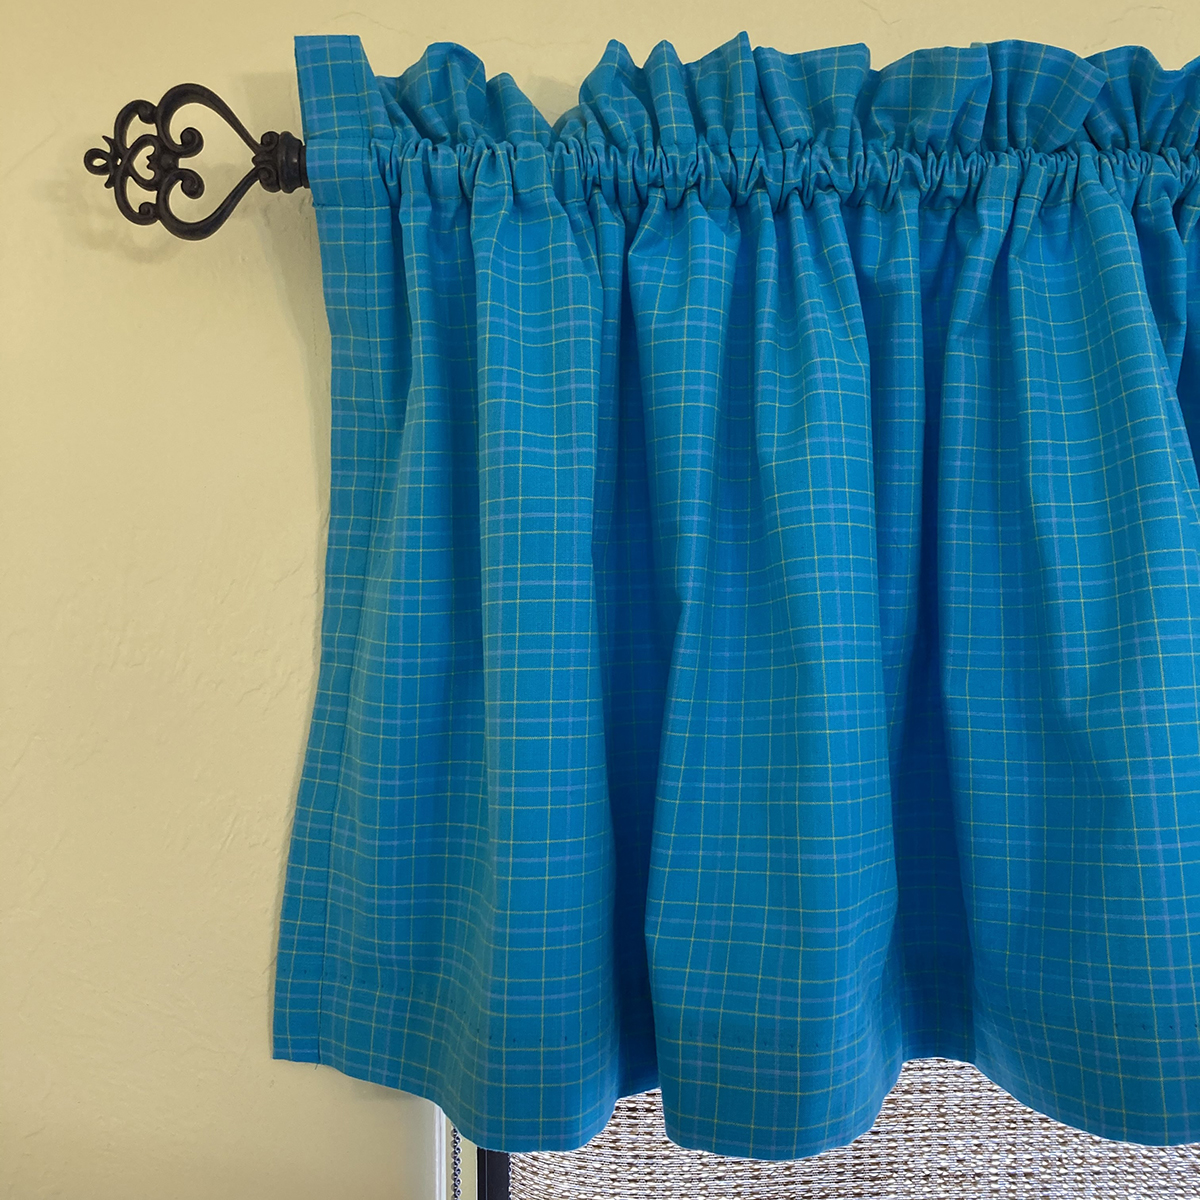 Easy Guide to Hanging a Tie Up Valance